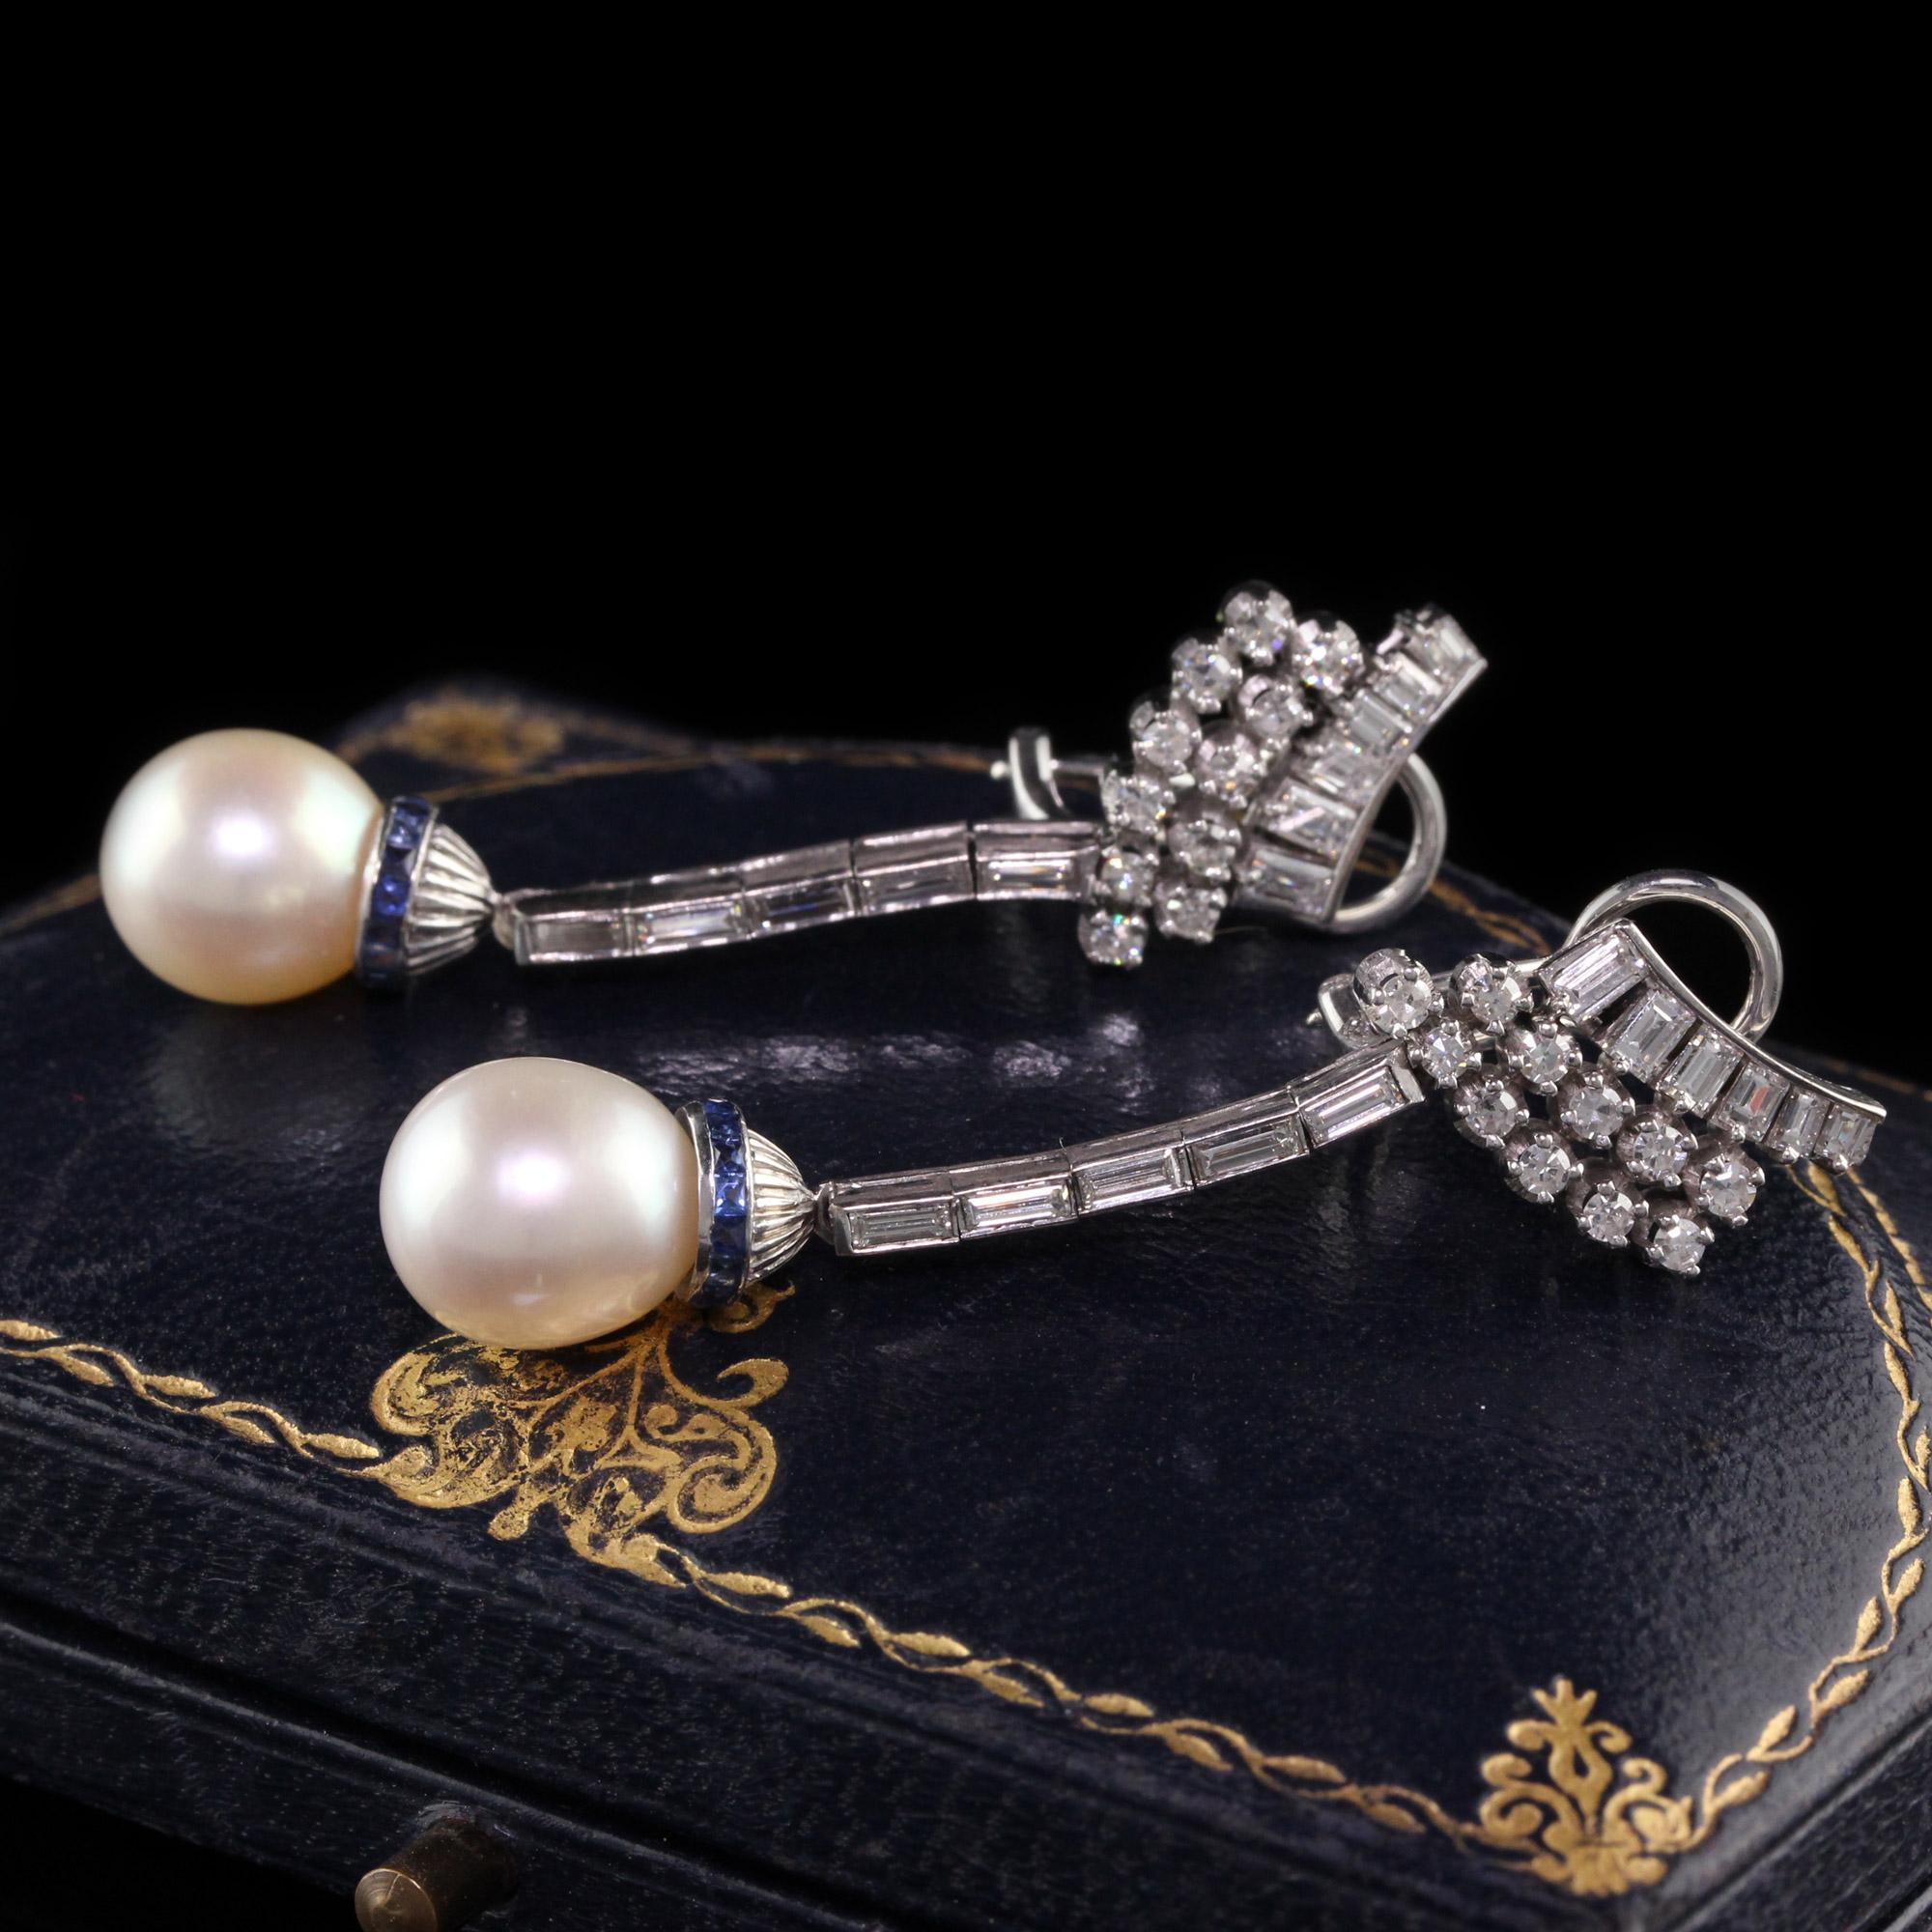 Gorgeous Antique Art Deco Palladium Diamond Sapphire Pearl Drop Earrings. These beautiful pair of earrings have single cut and baguettes on the earrings with french cut sapphires around the pearl drop.

Item #E0029

Metal: Palladium

Diamonds: